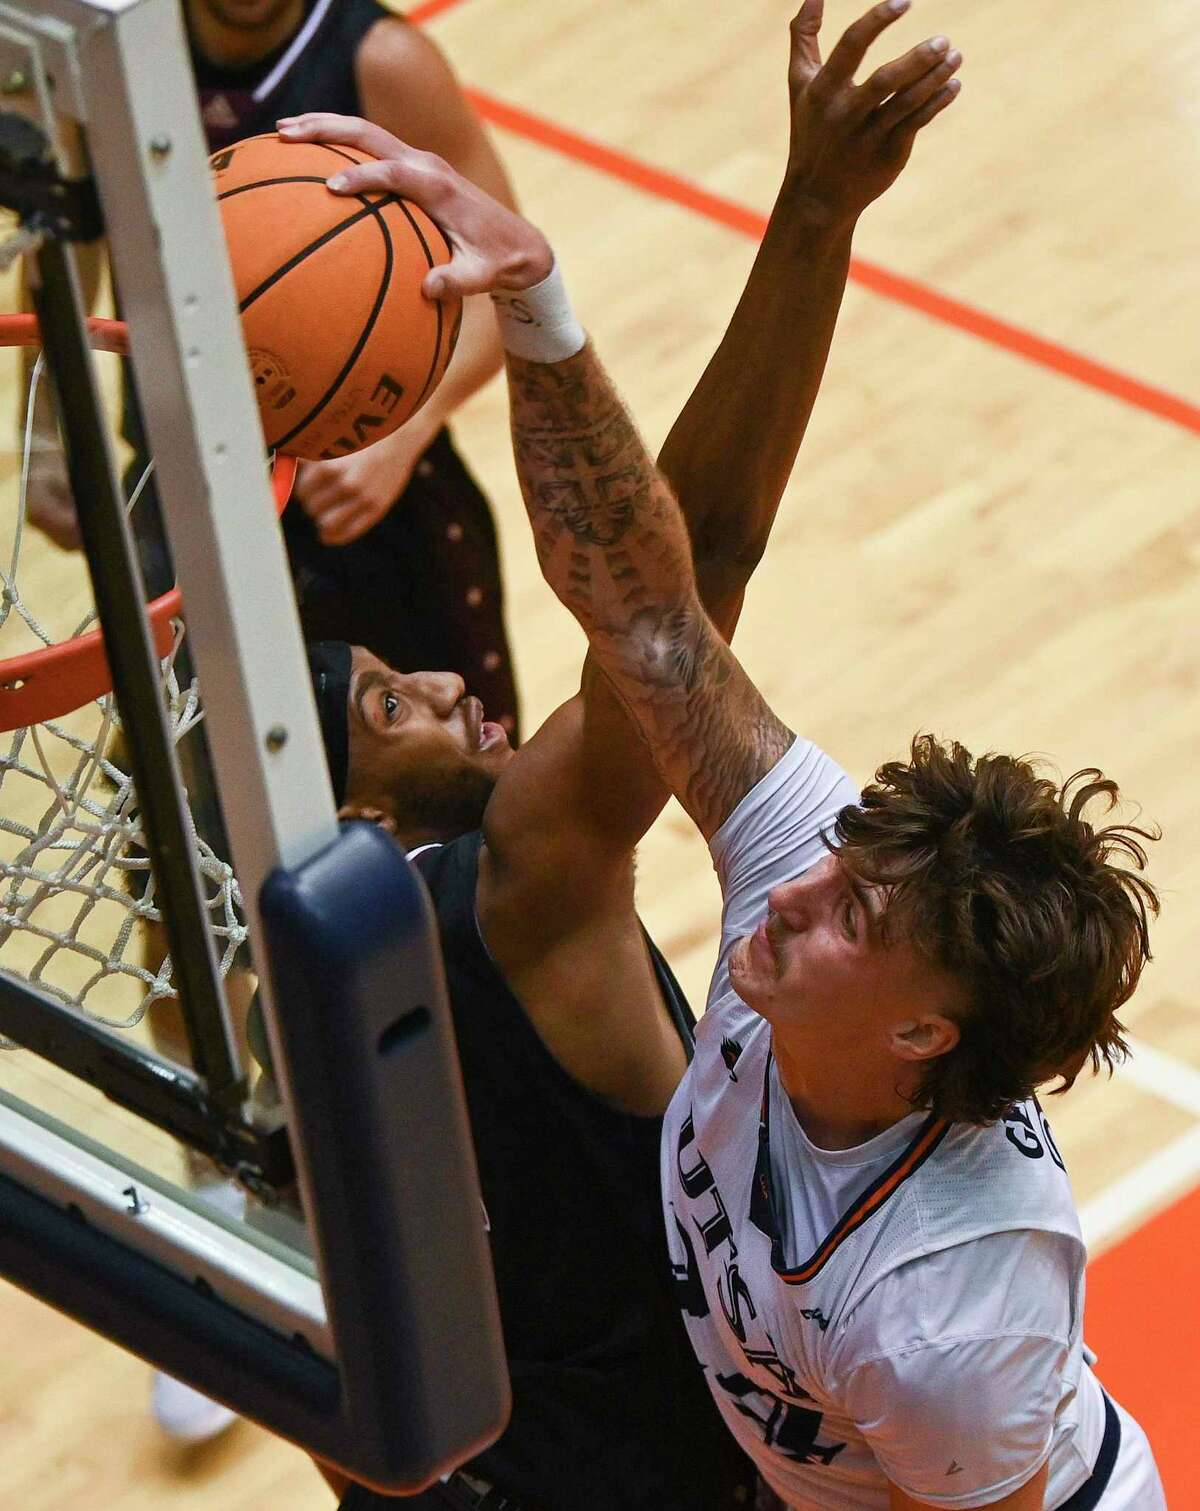 Jacob Germany of UTSA is fouled by Schreiner’s Kamden Ross during college basketball action at the UTSA Convocation Center on Wednesday, Nov. 2, 2022.